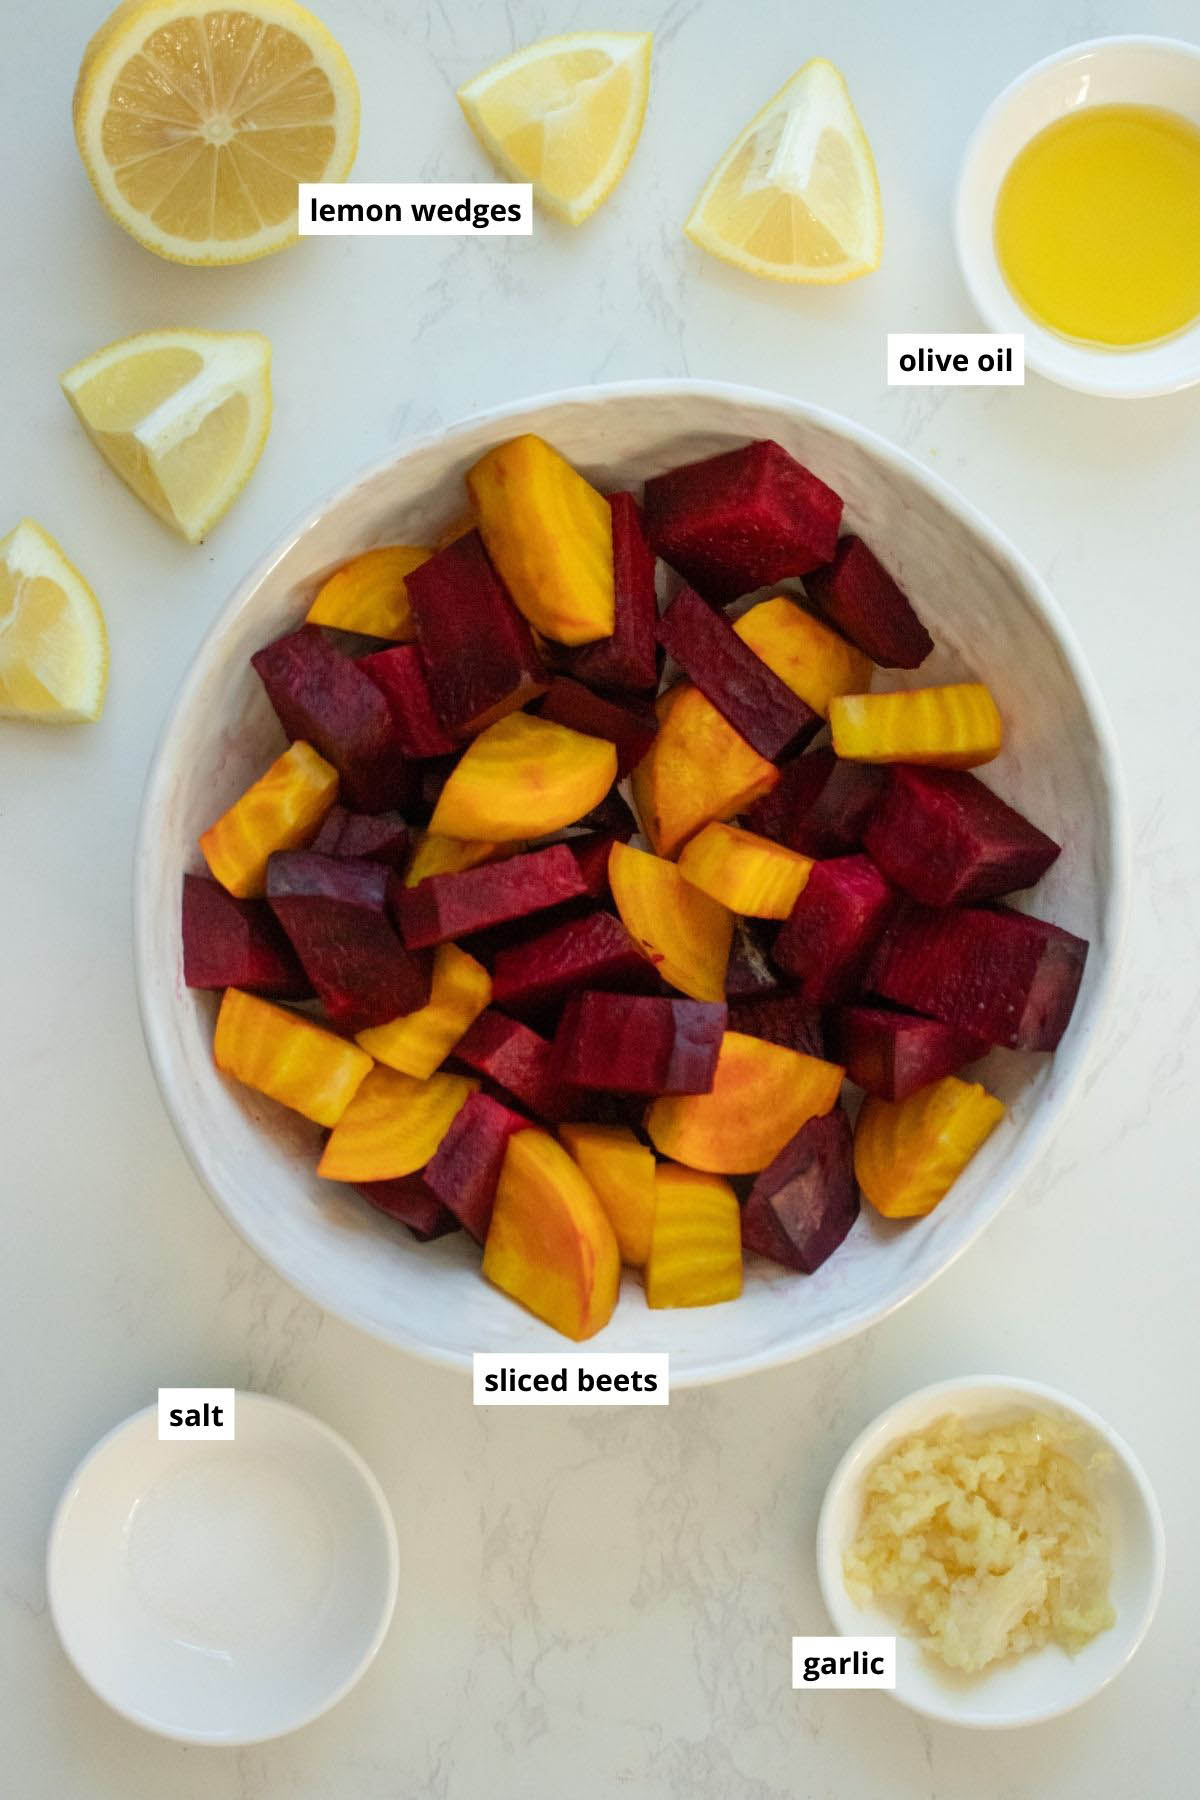 beets, garlic, oil, salt, and lemon wedges in bowls on a white table